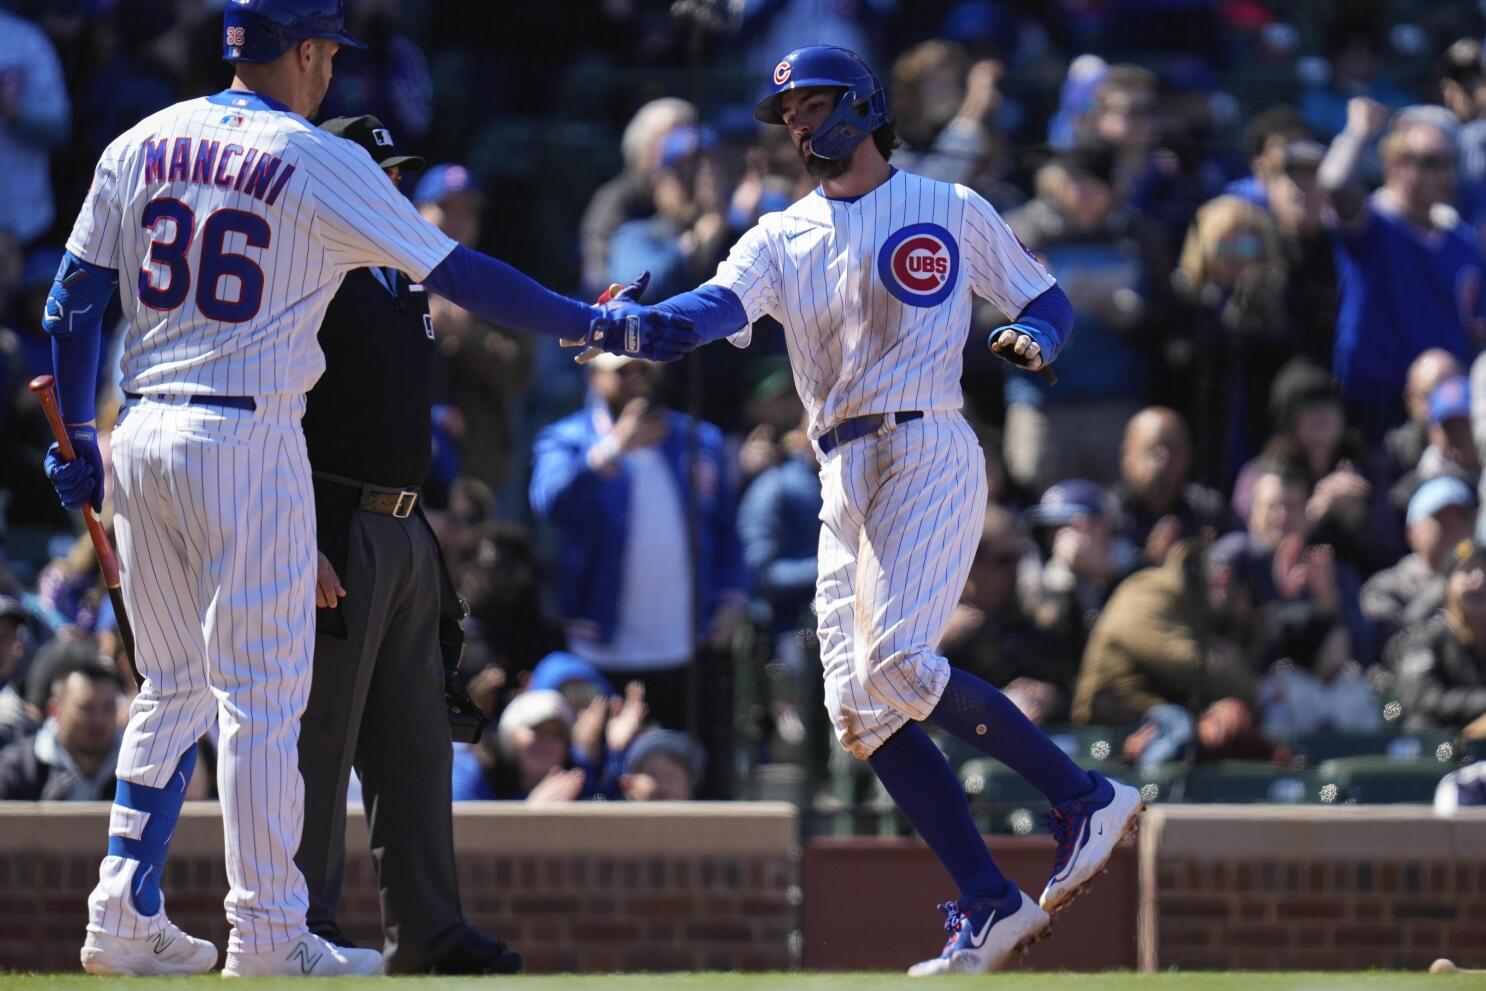 Cubs place Madrigal on IL, recall Young from minors